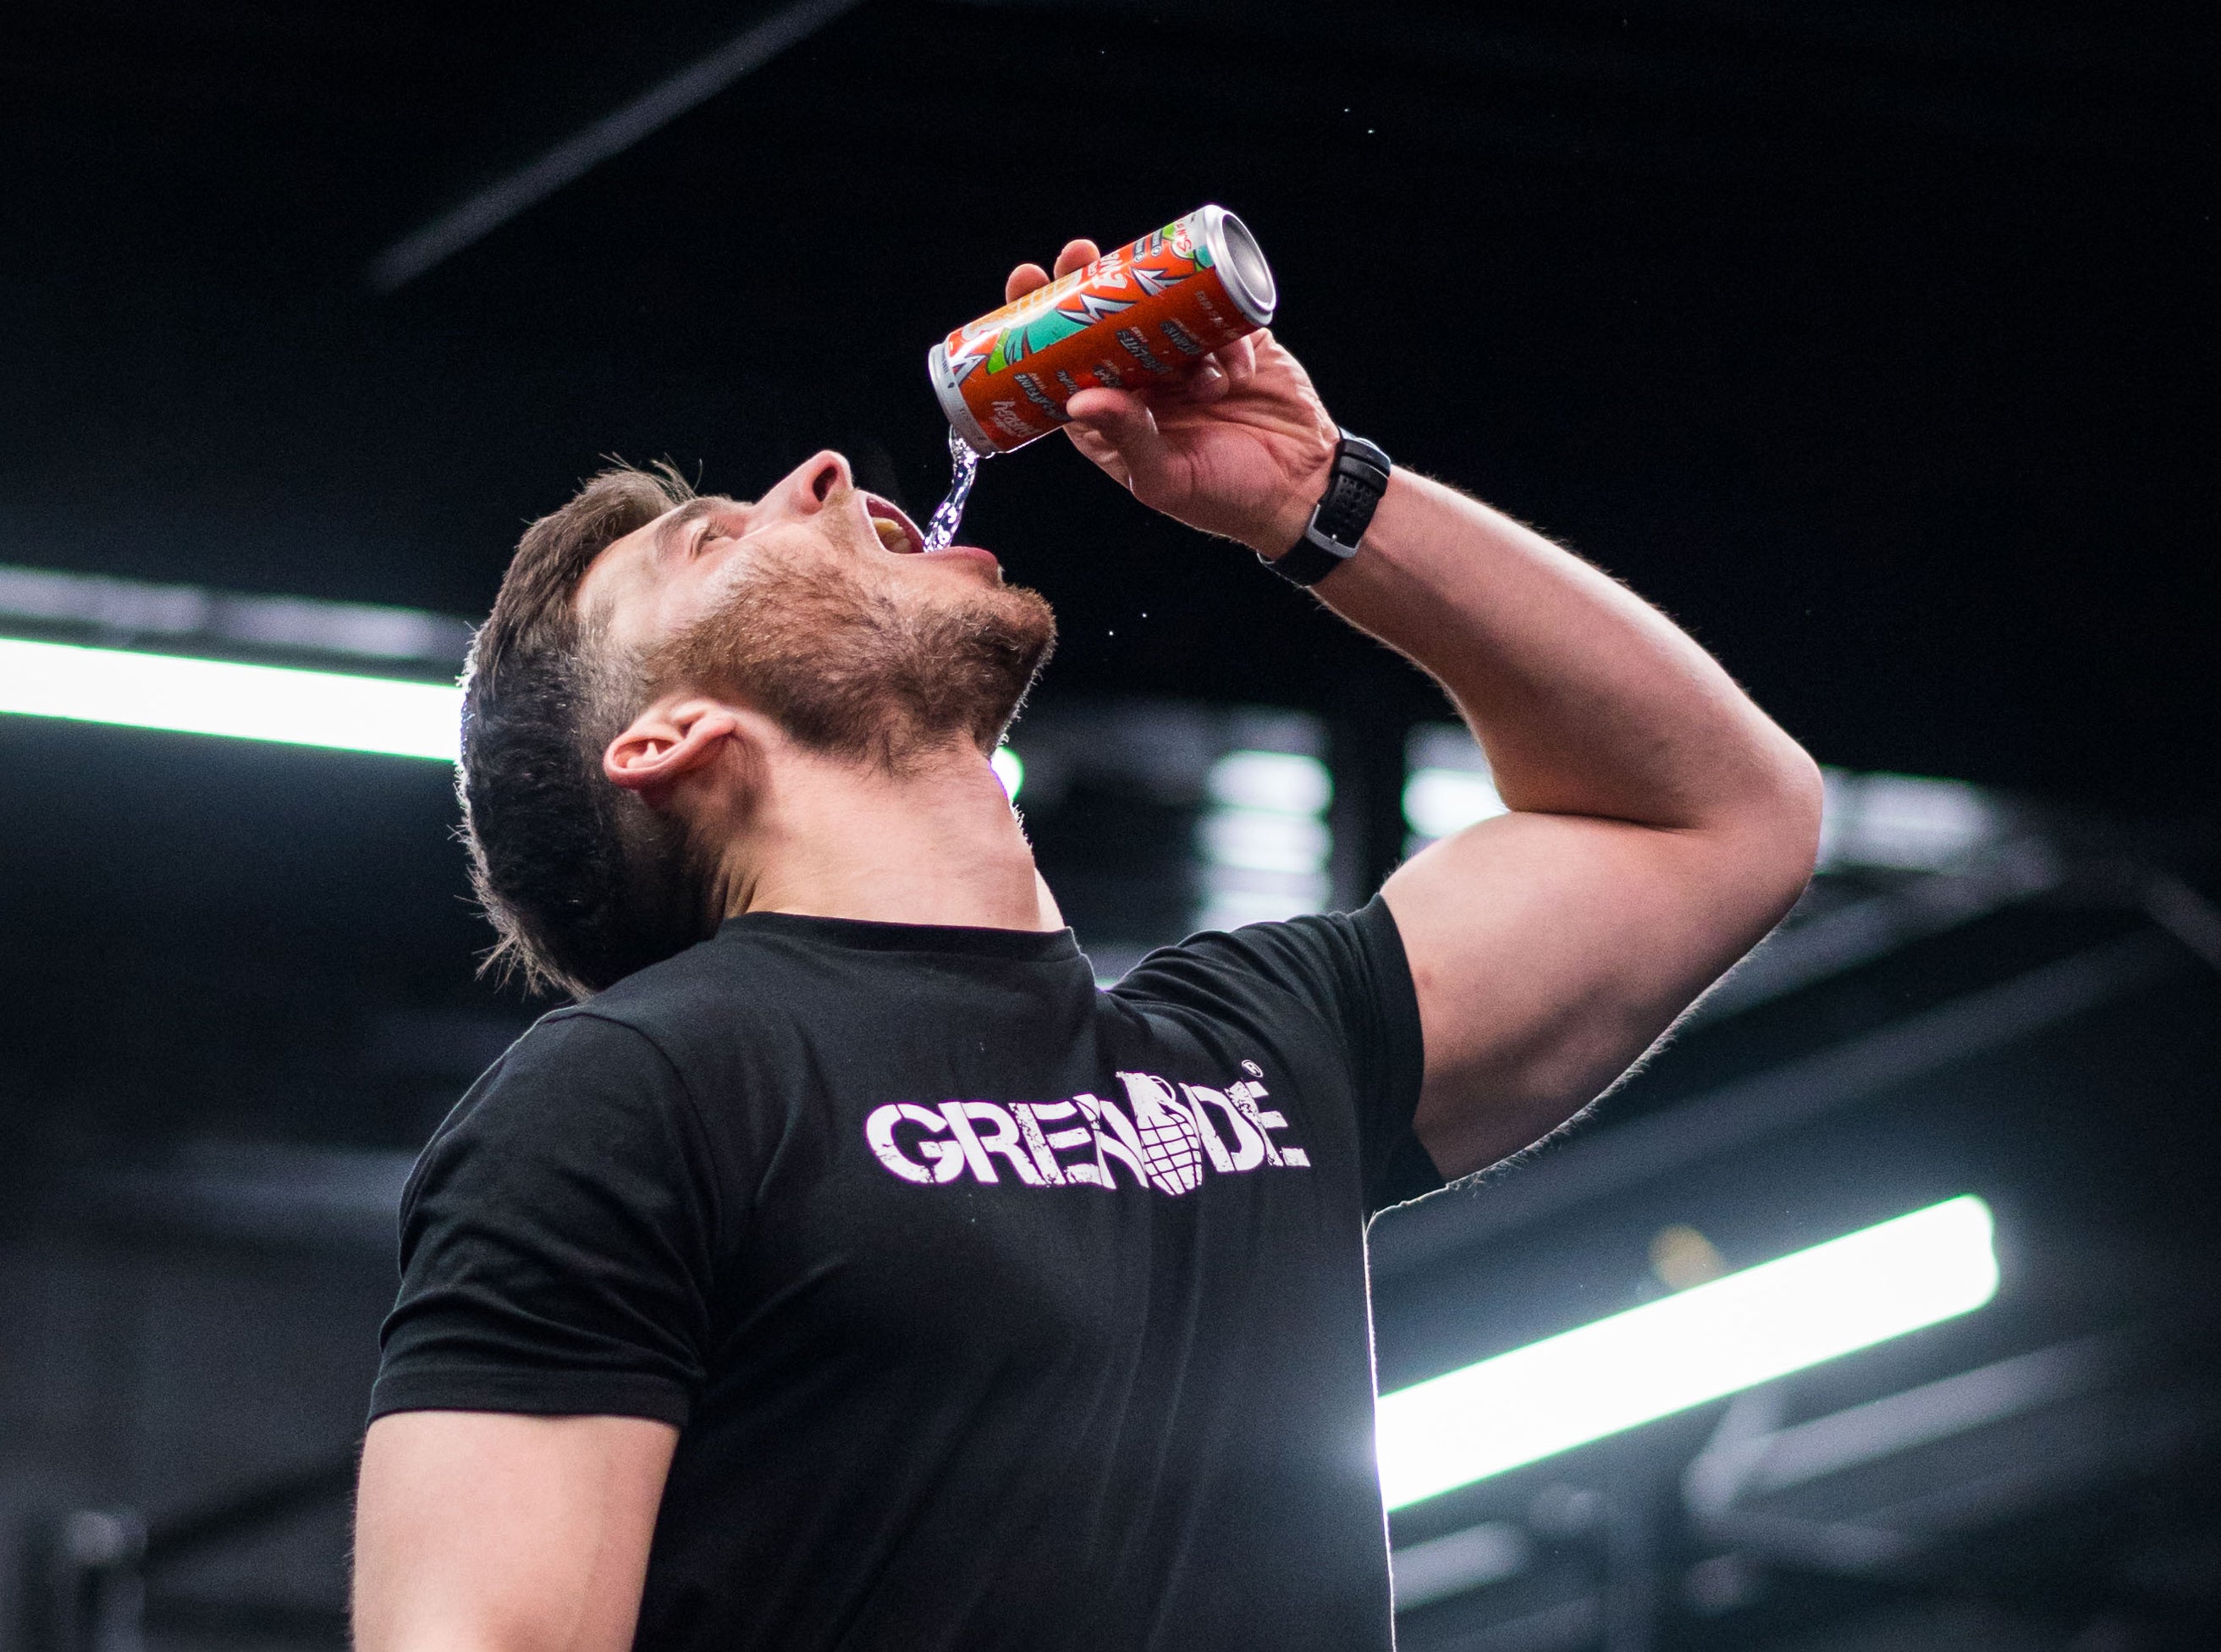 Hydrating with Grenade Energy